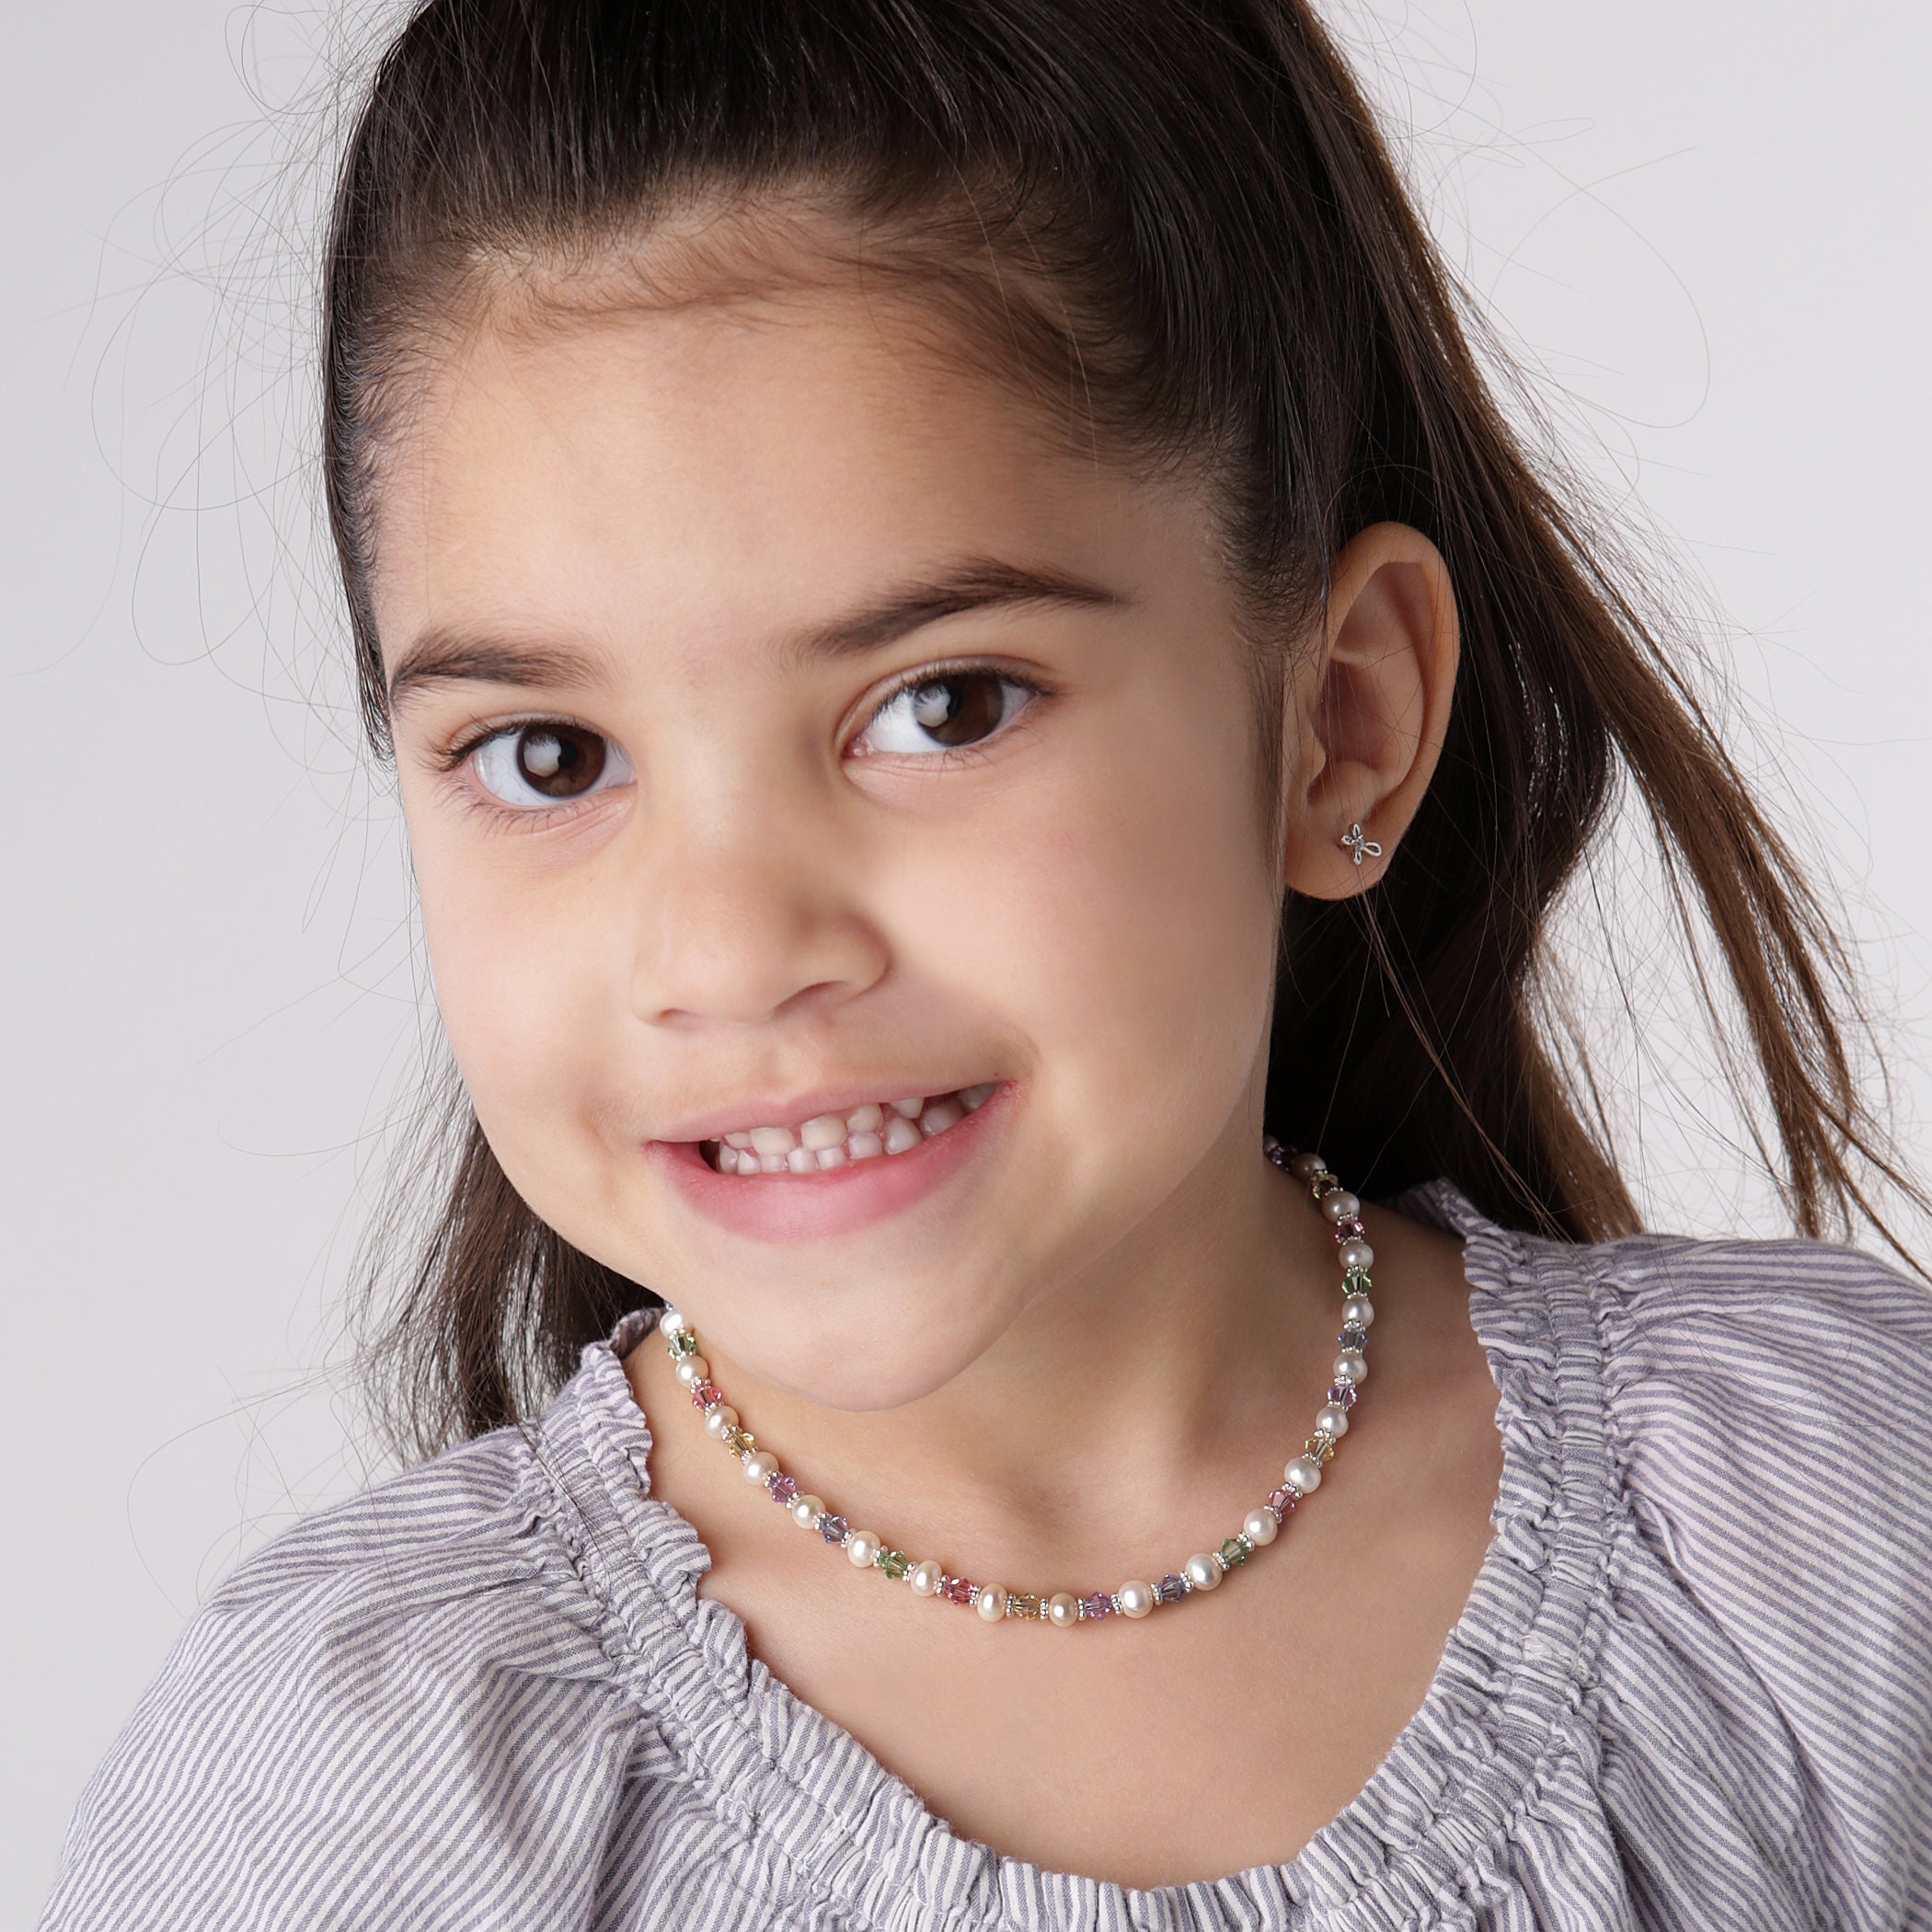 Asian Little Girl With A Pearl Necklace